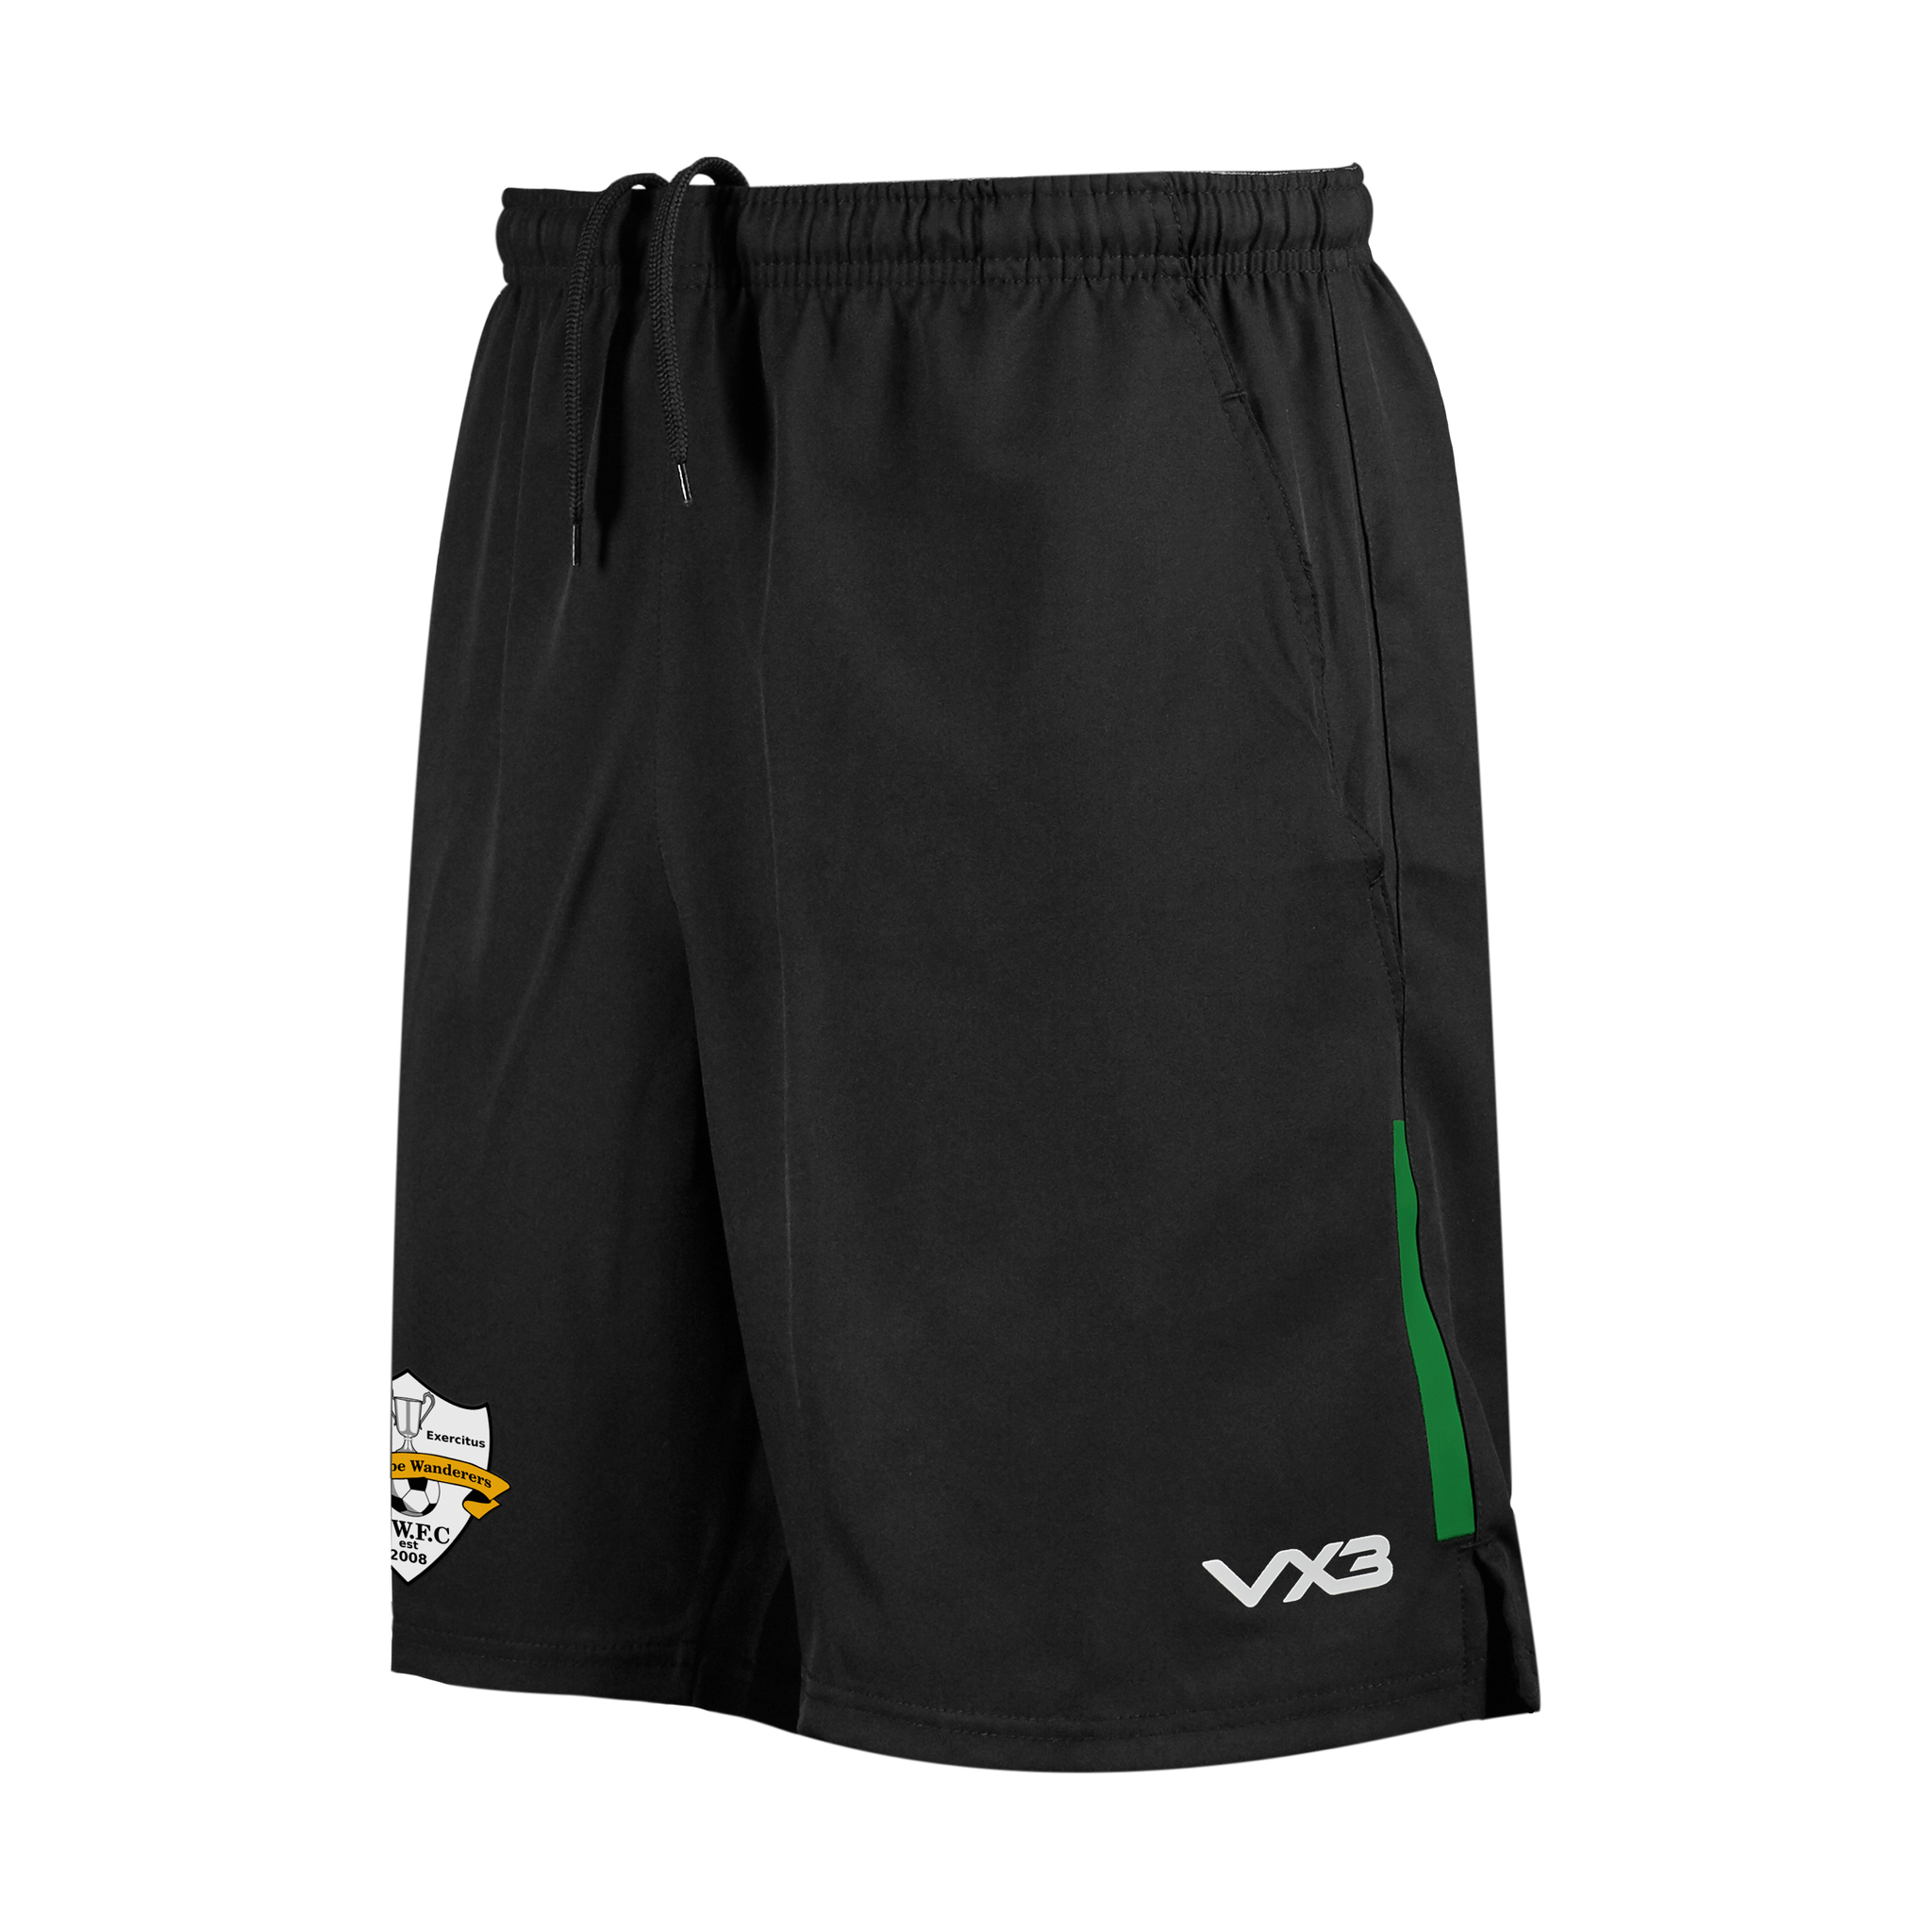 Watcombe Wanderers FC Fortis Travel Shorts